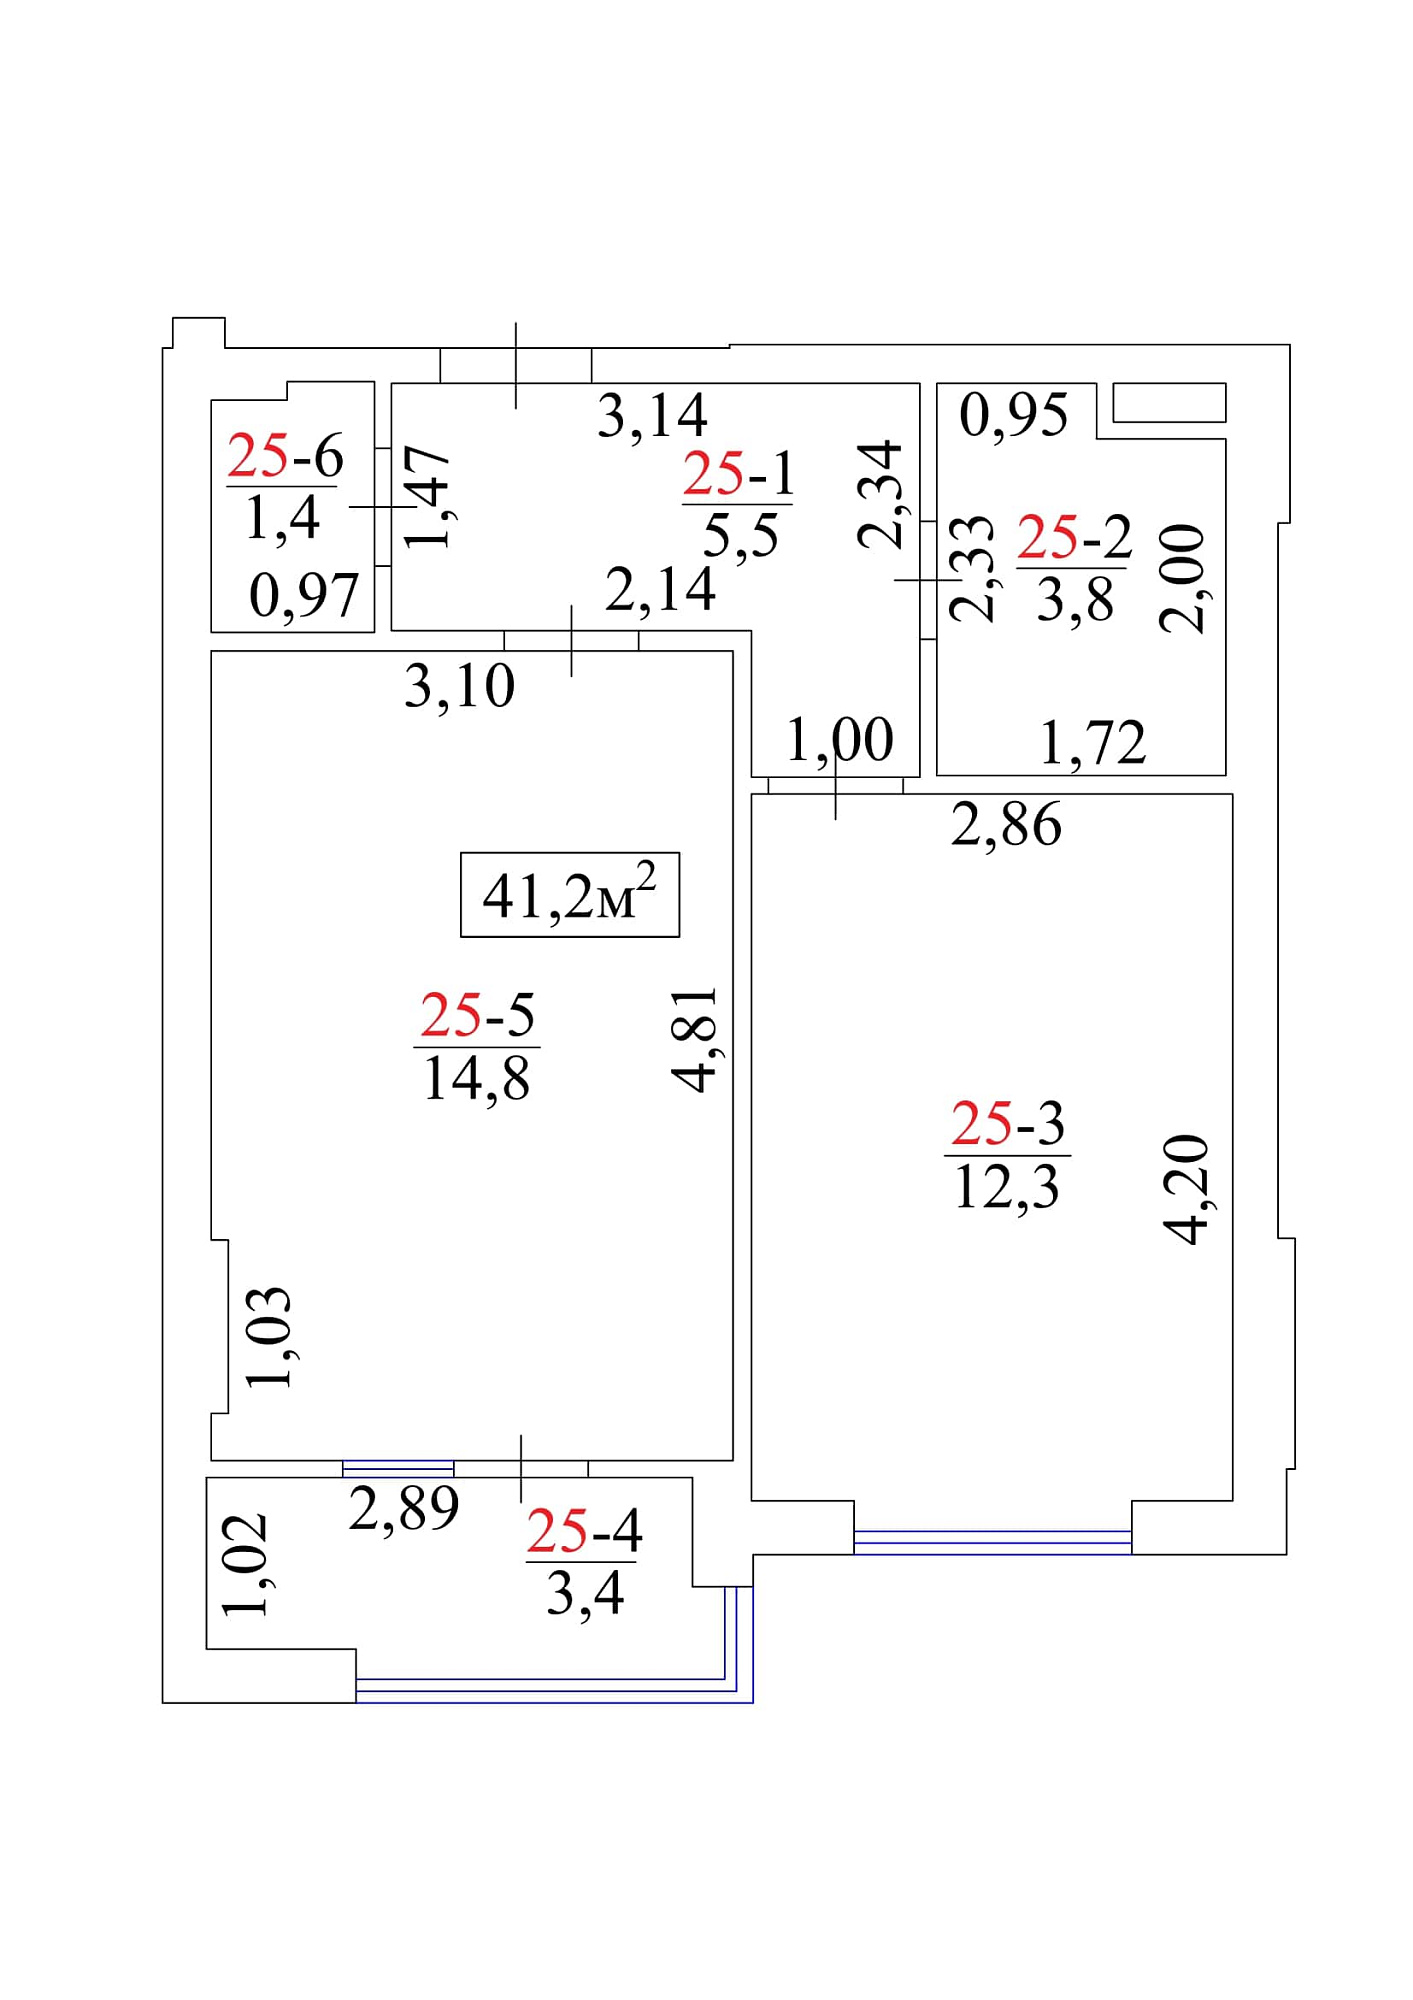 Planning 1-rm flats area 41.2m2, AB-01-03/00025.